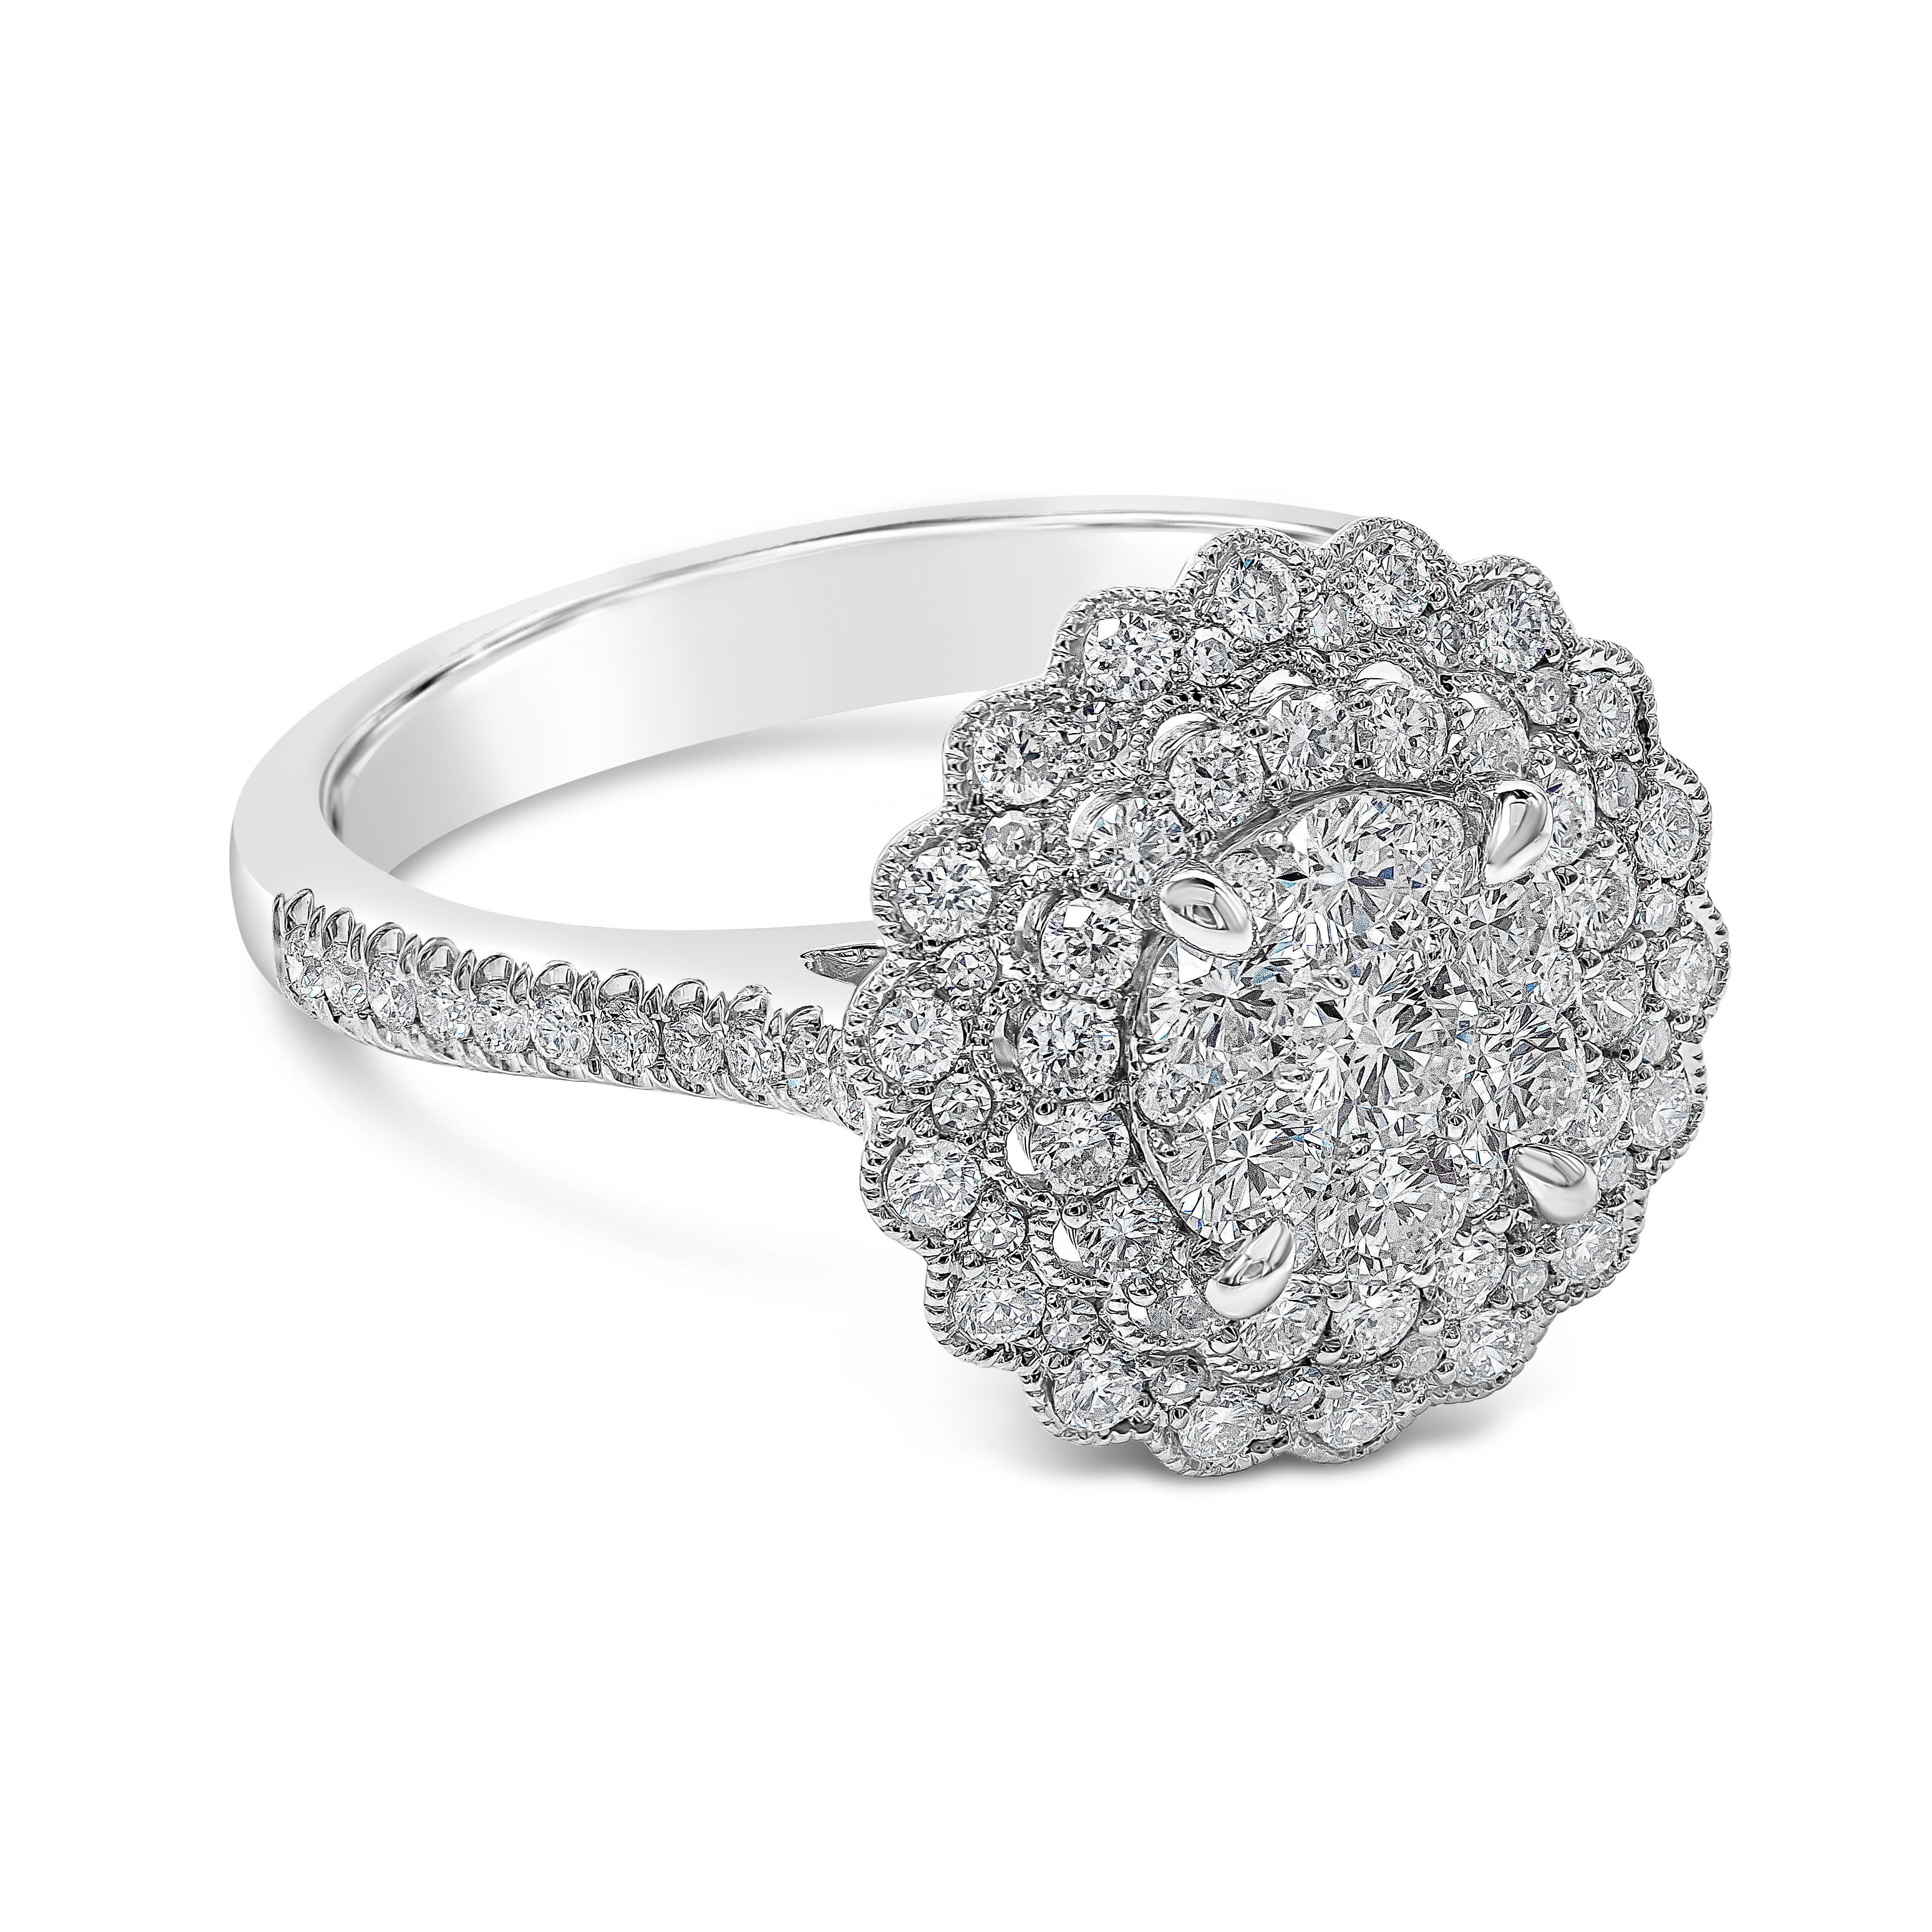 A charming engagement ring style showcasing a round brilliant cut diamond in the center surrounded by two rows of round brilliant diamonds set in a flower-motif design. Finished with milgrain edges. Accented with more diamond set half-way down the